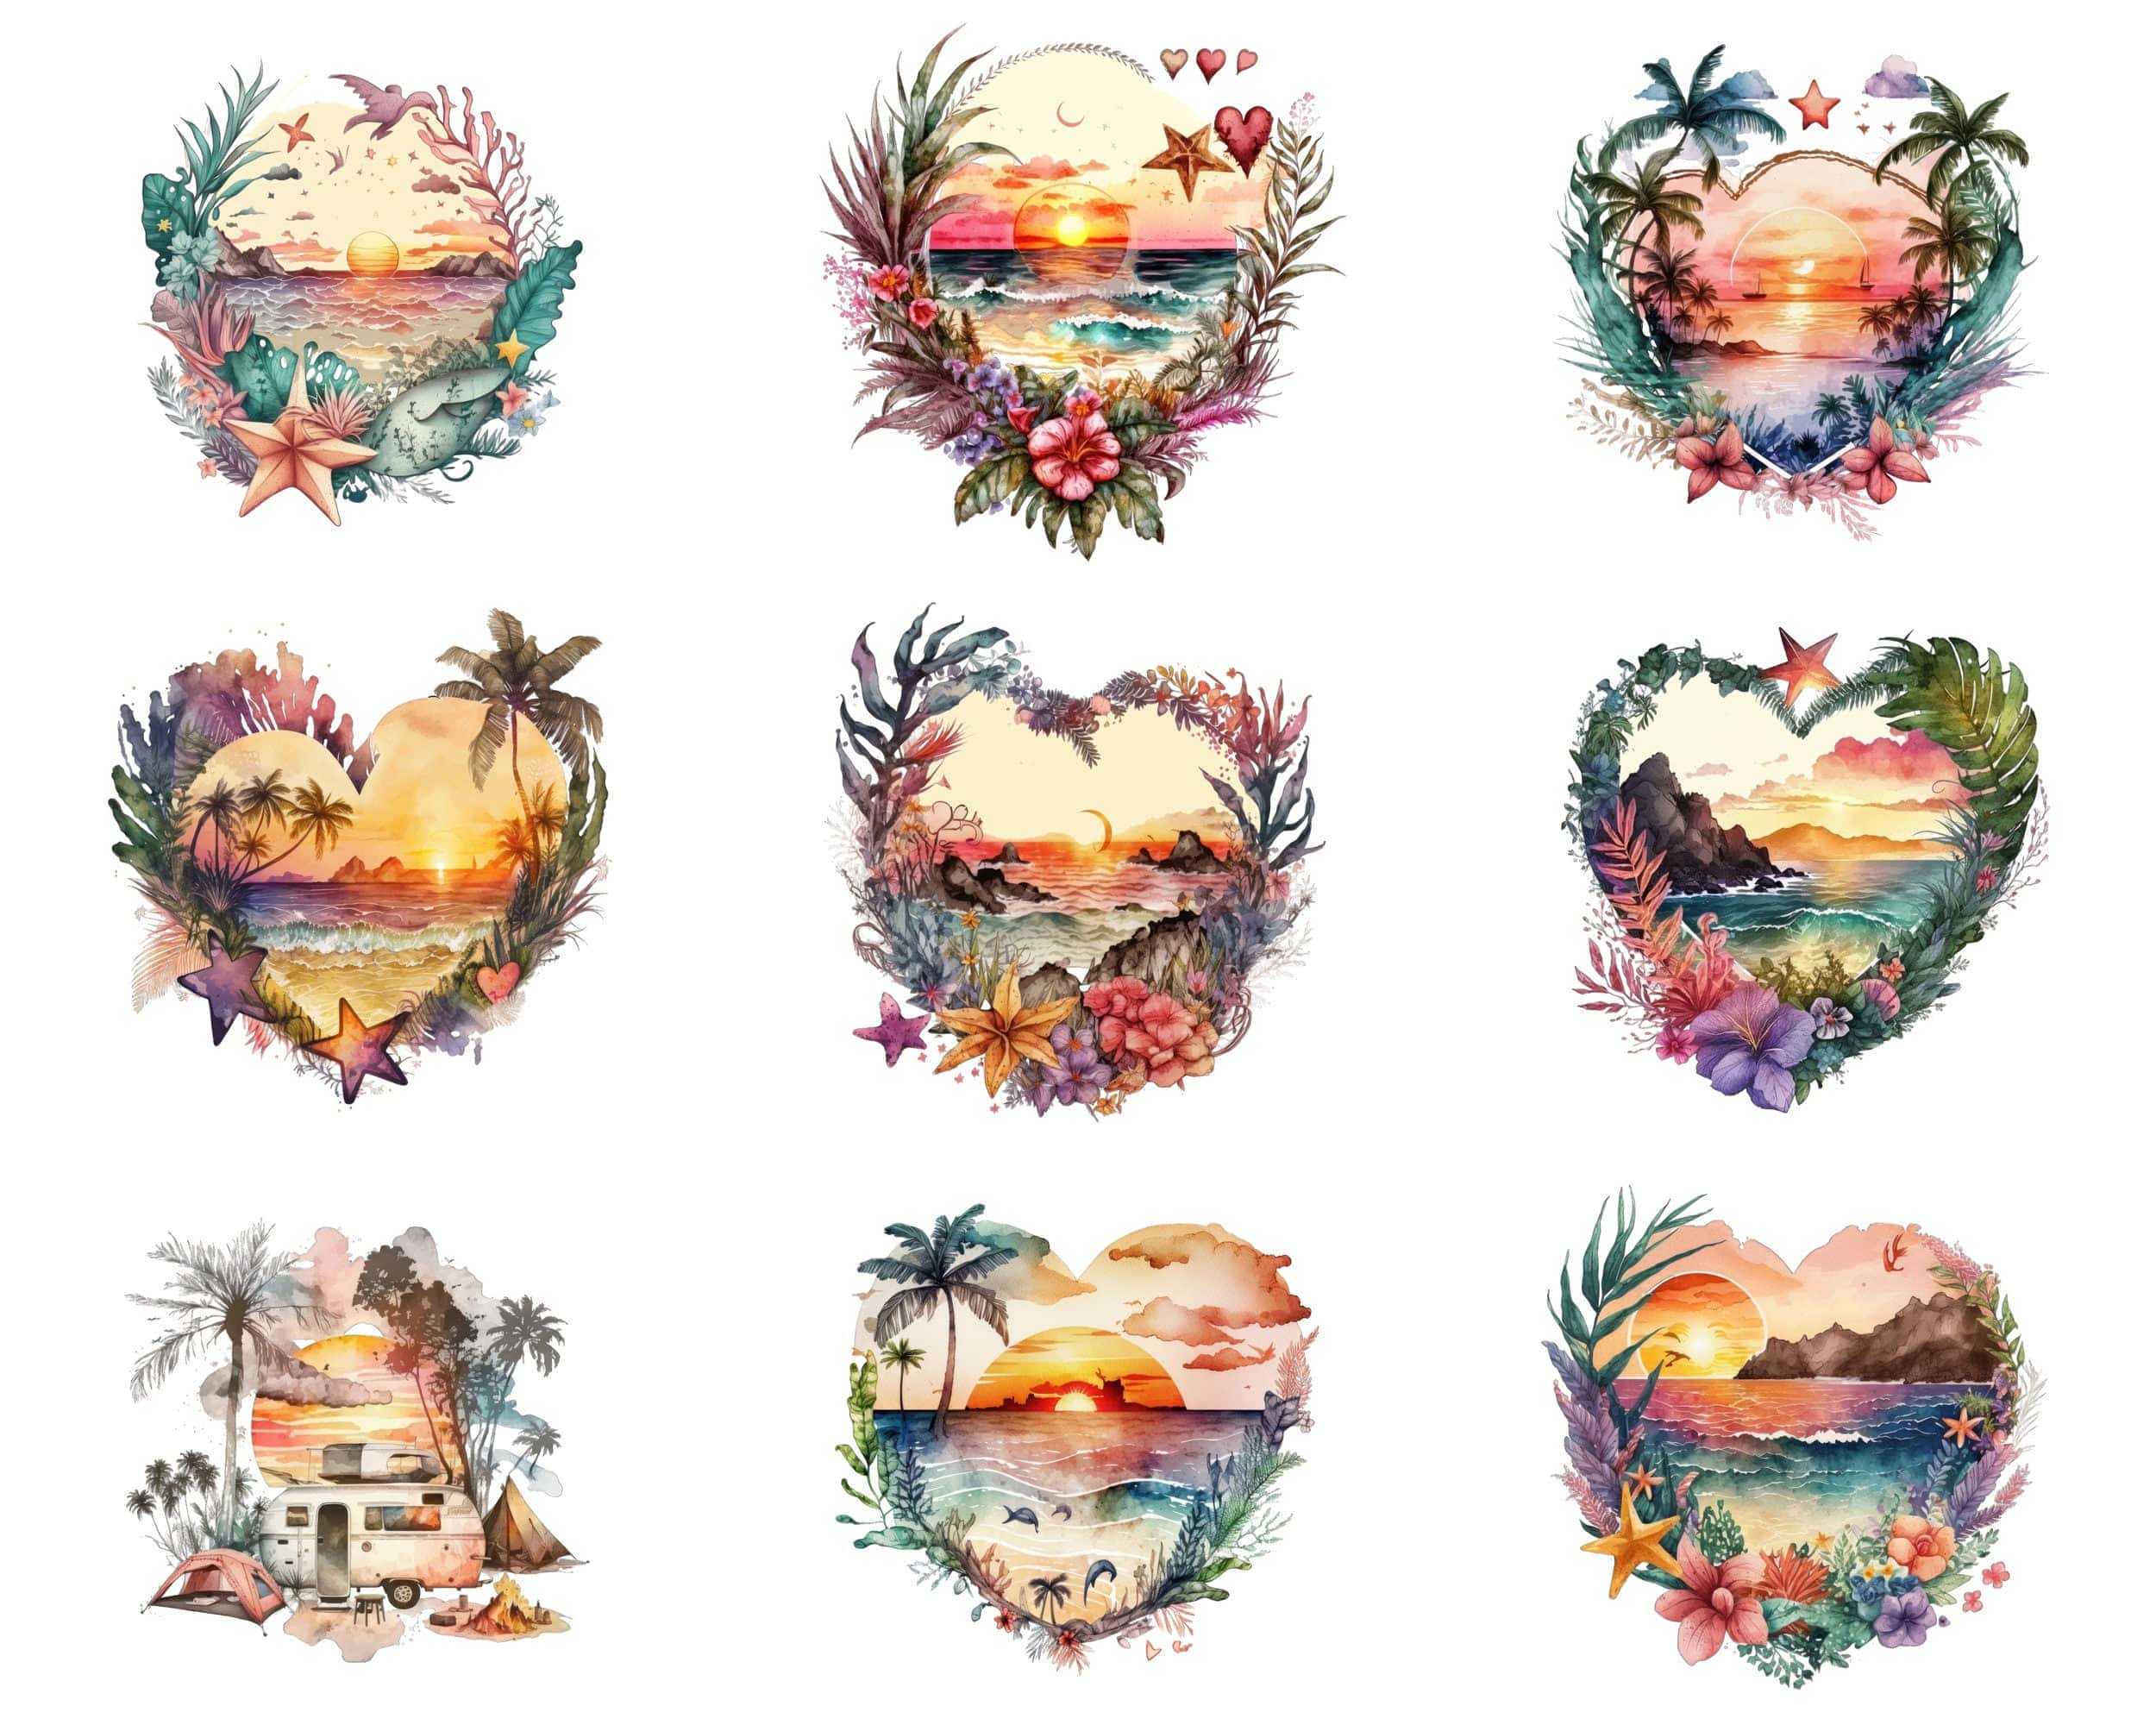 Spread Summer Love with Our Bundle of 60 Heart-Shaped Watercolor Clipart PNG, Sunset Heart Watercolor Clipart, Perfect for Commercial Use. Digital Download Sumobundle